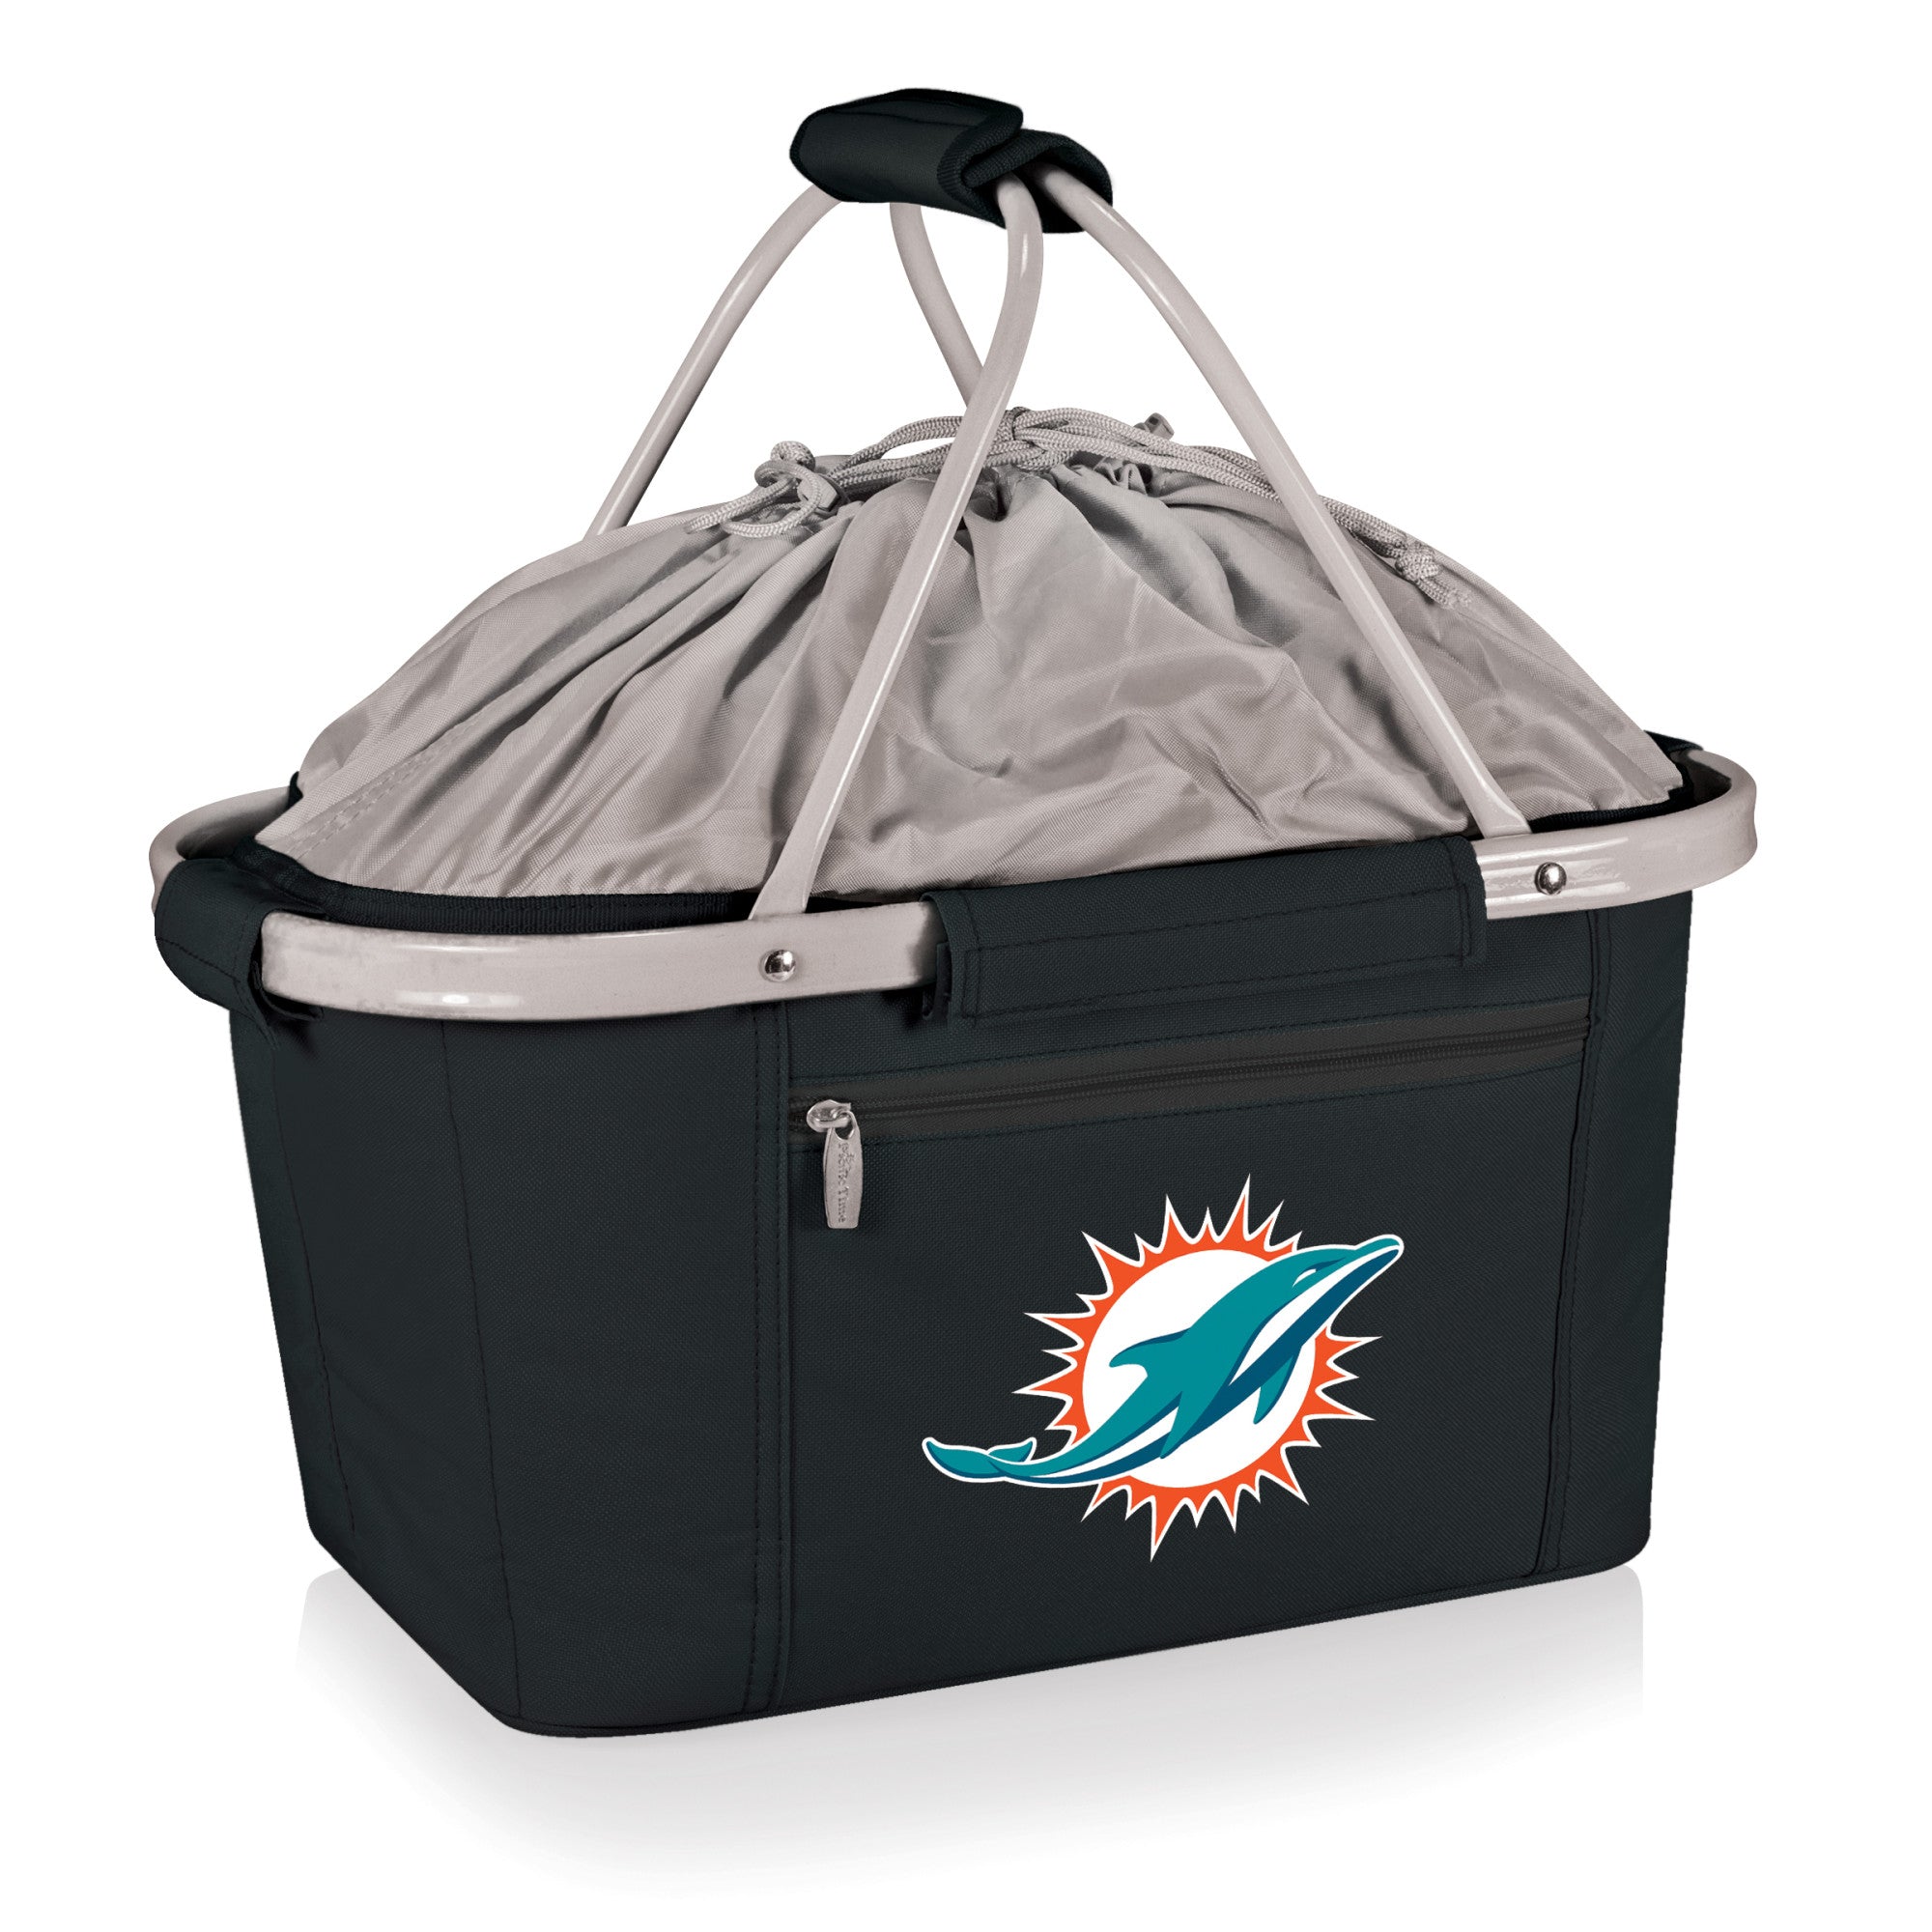 Miami Dolphins - Metro Basket Collapsible Cooler Tote